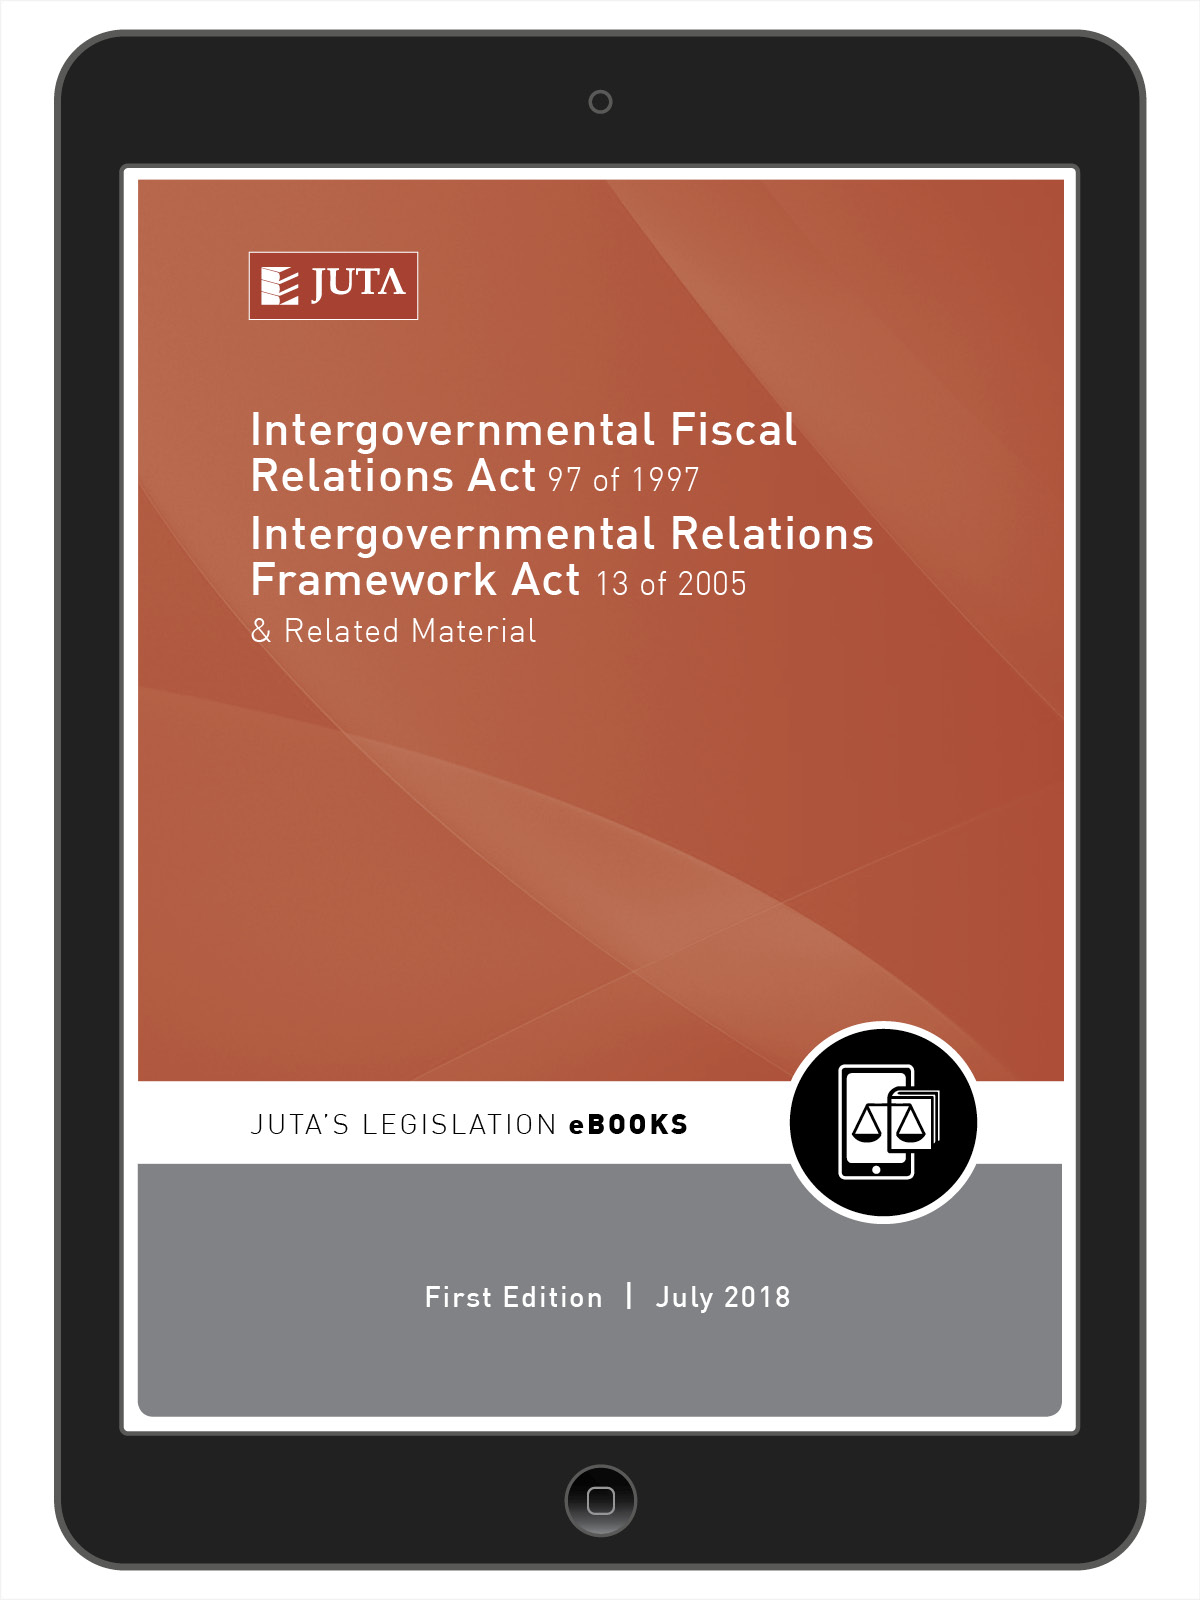 Intergovernmental Fiscal Relations Act 97 of 1997; Intergovernmental Relations Framework Act 13 of 2005 & Related Material